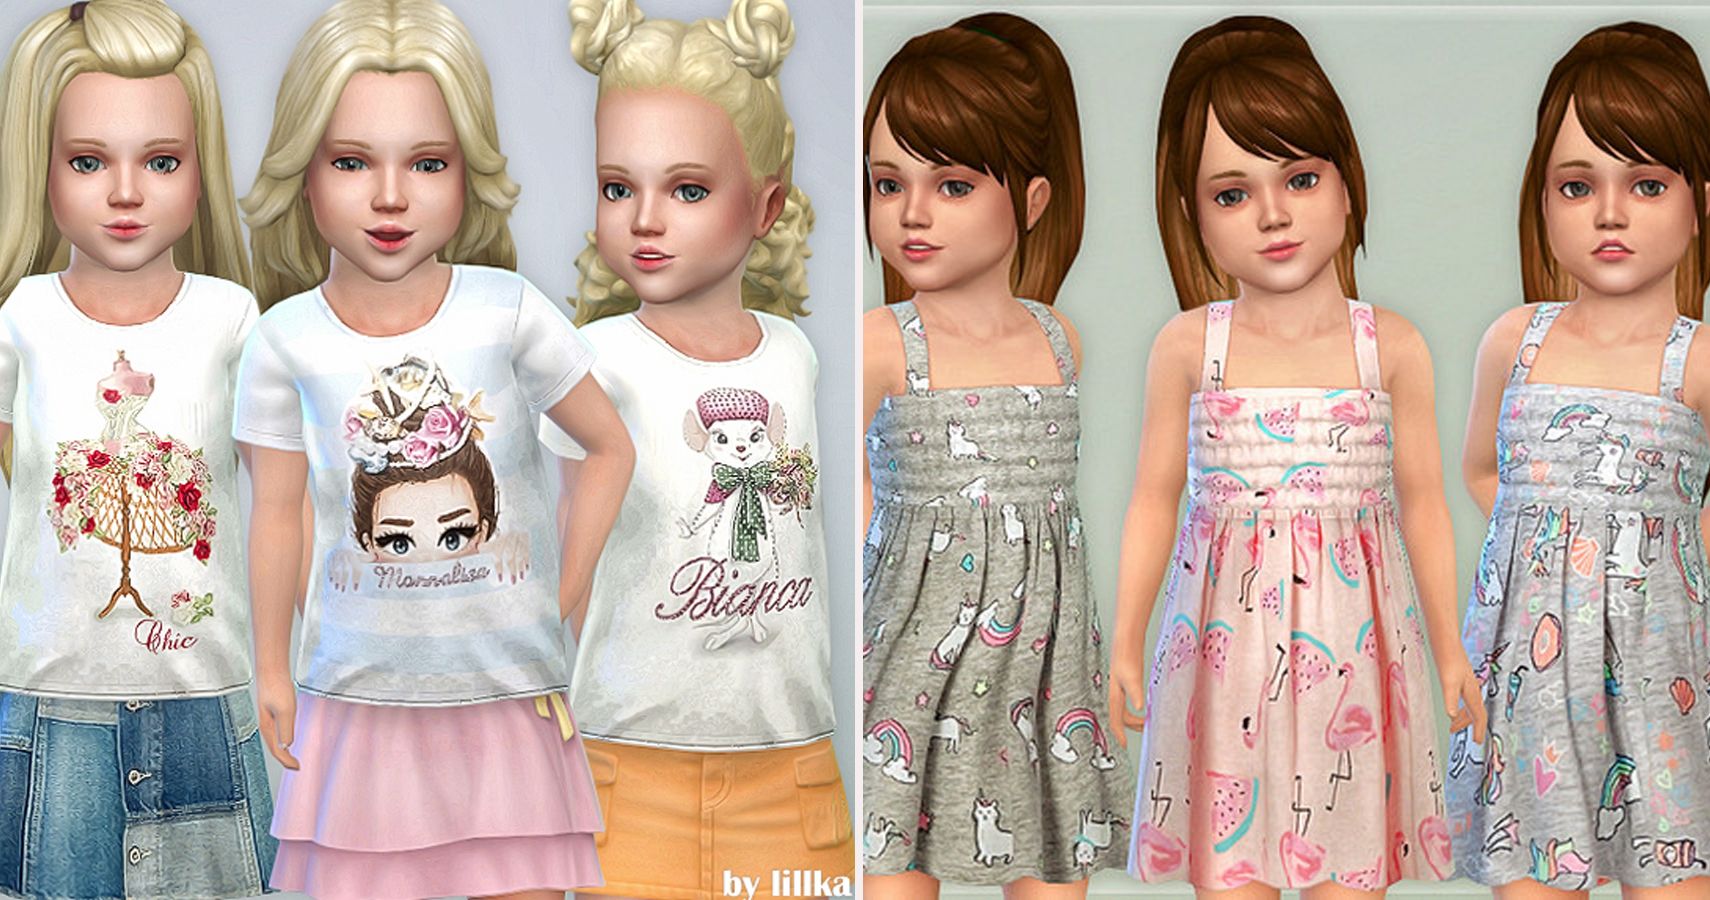 Left side 3 blonde toddlers in logo t-shirts. Right side 3 brunette toddlers in dresses.